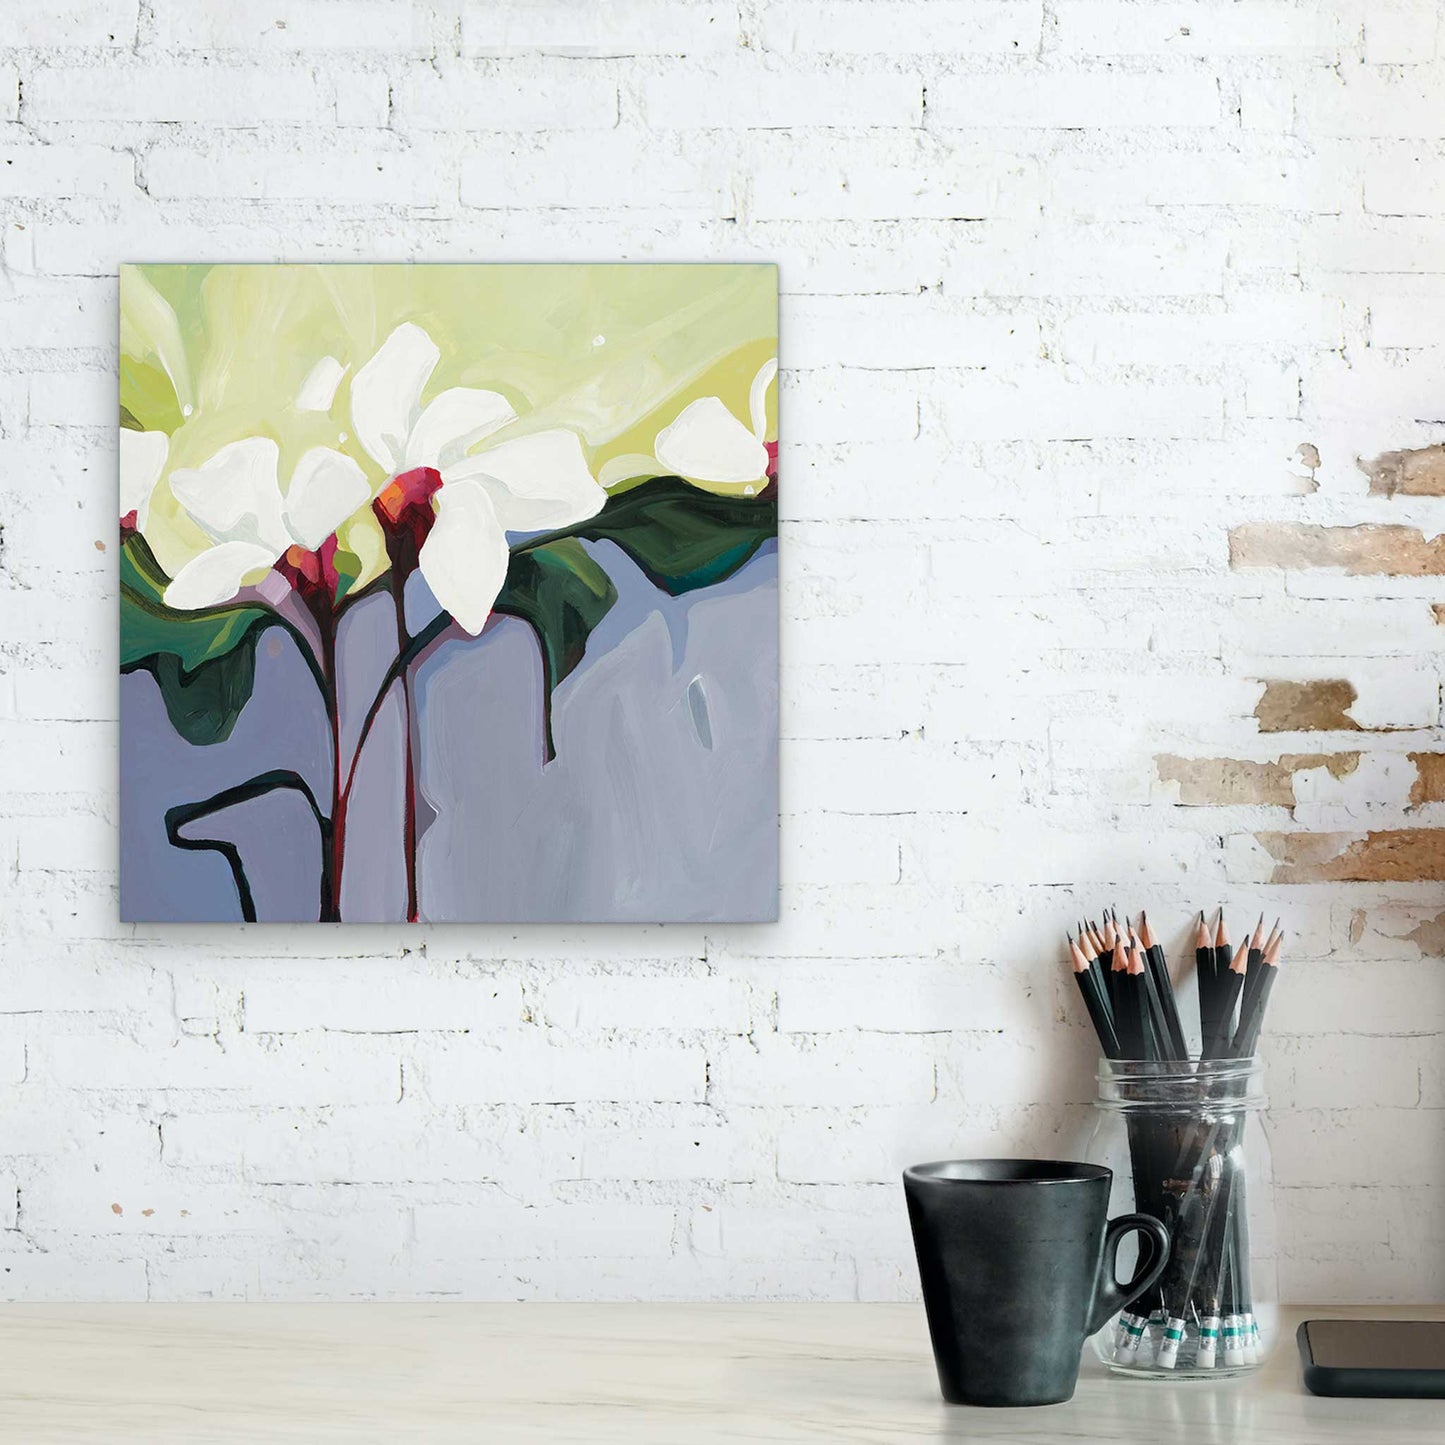 Acrylic flower painting canvas floral art abstract flower by Canadian artist Susannah Bleasby